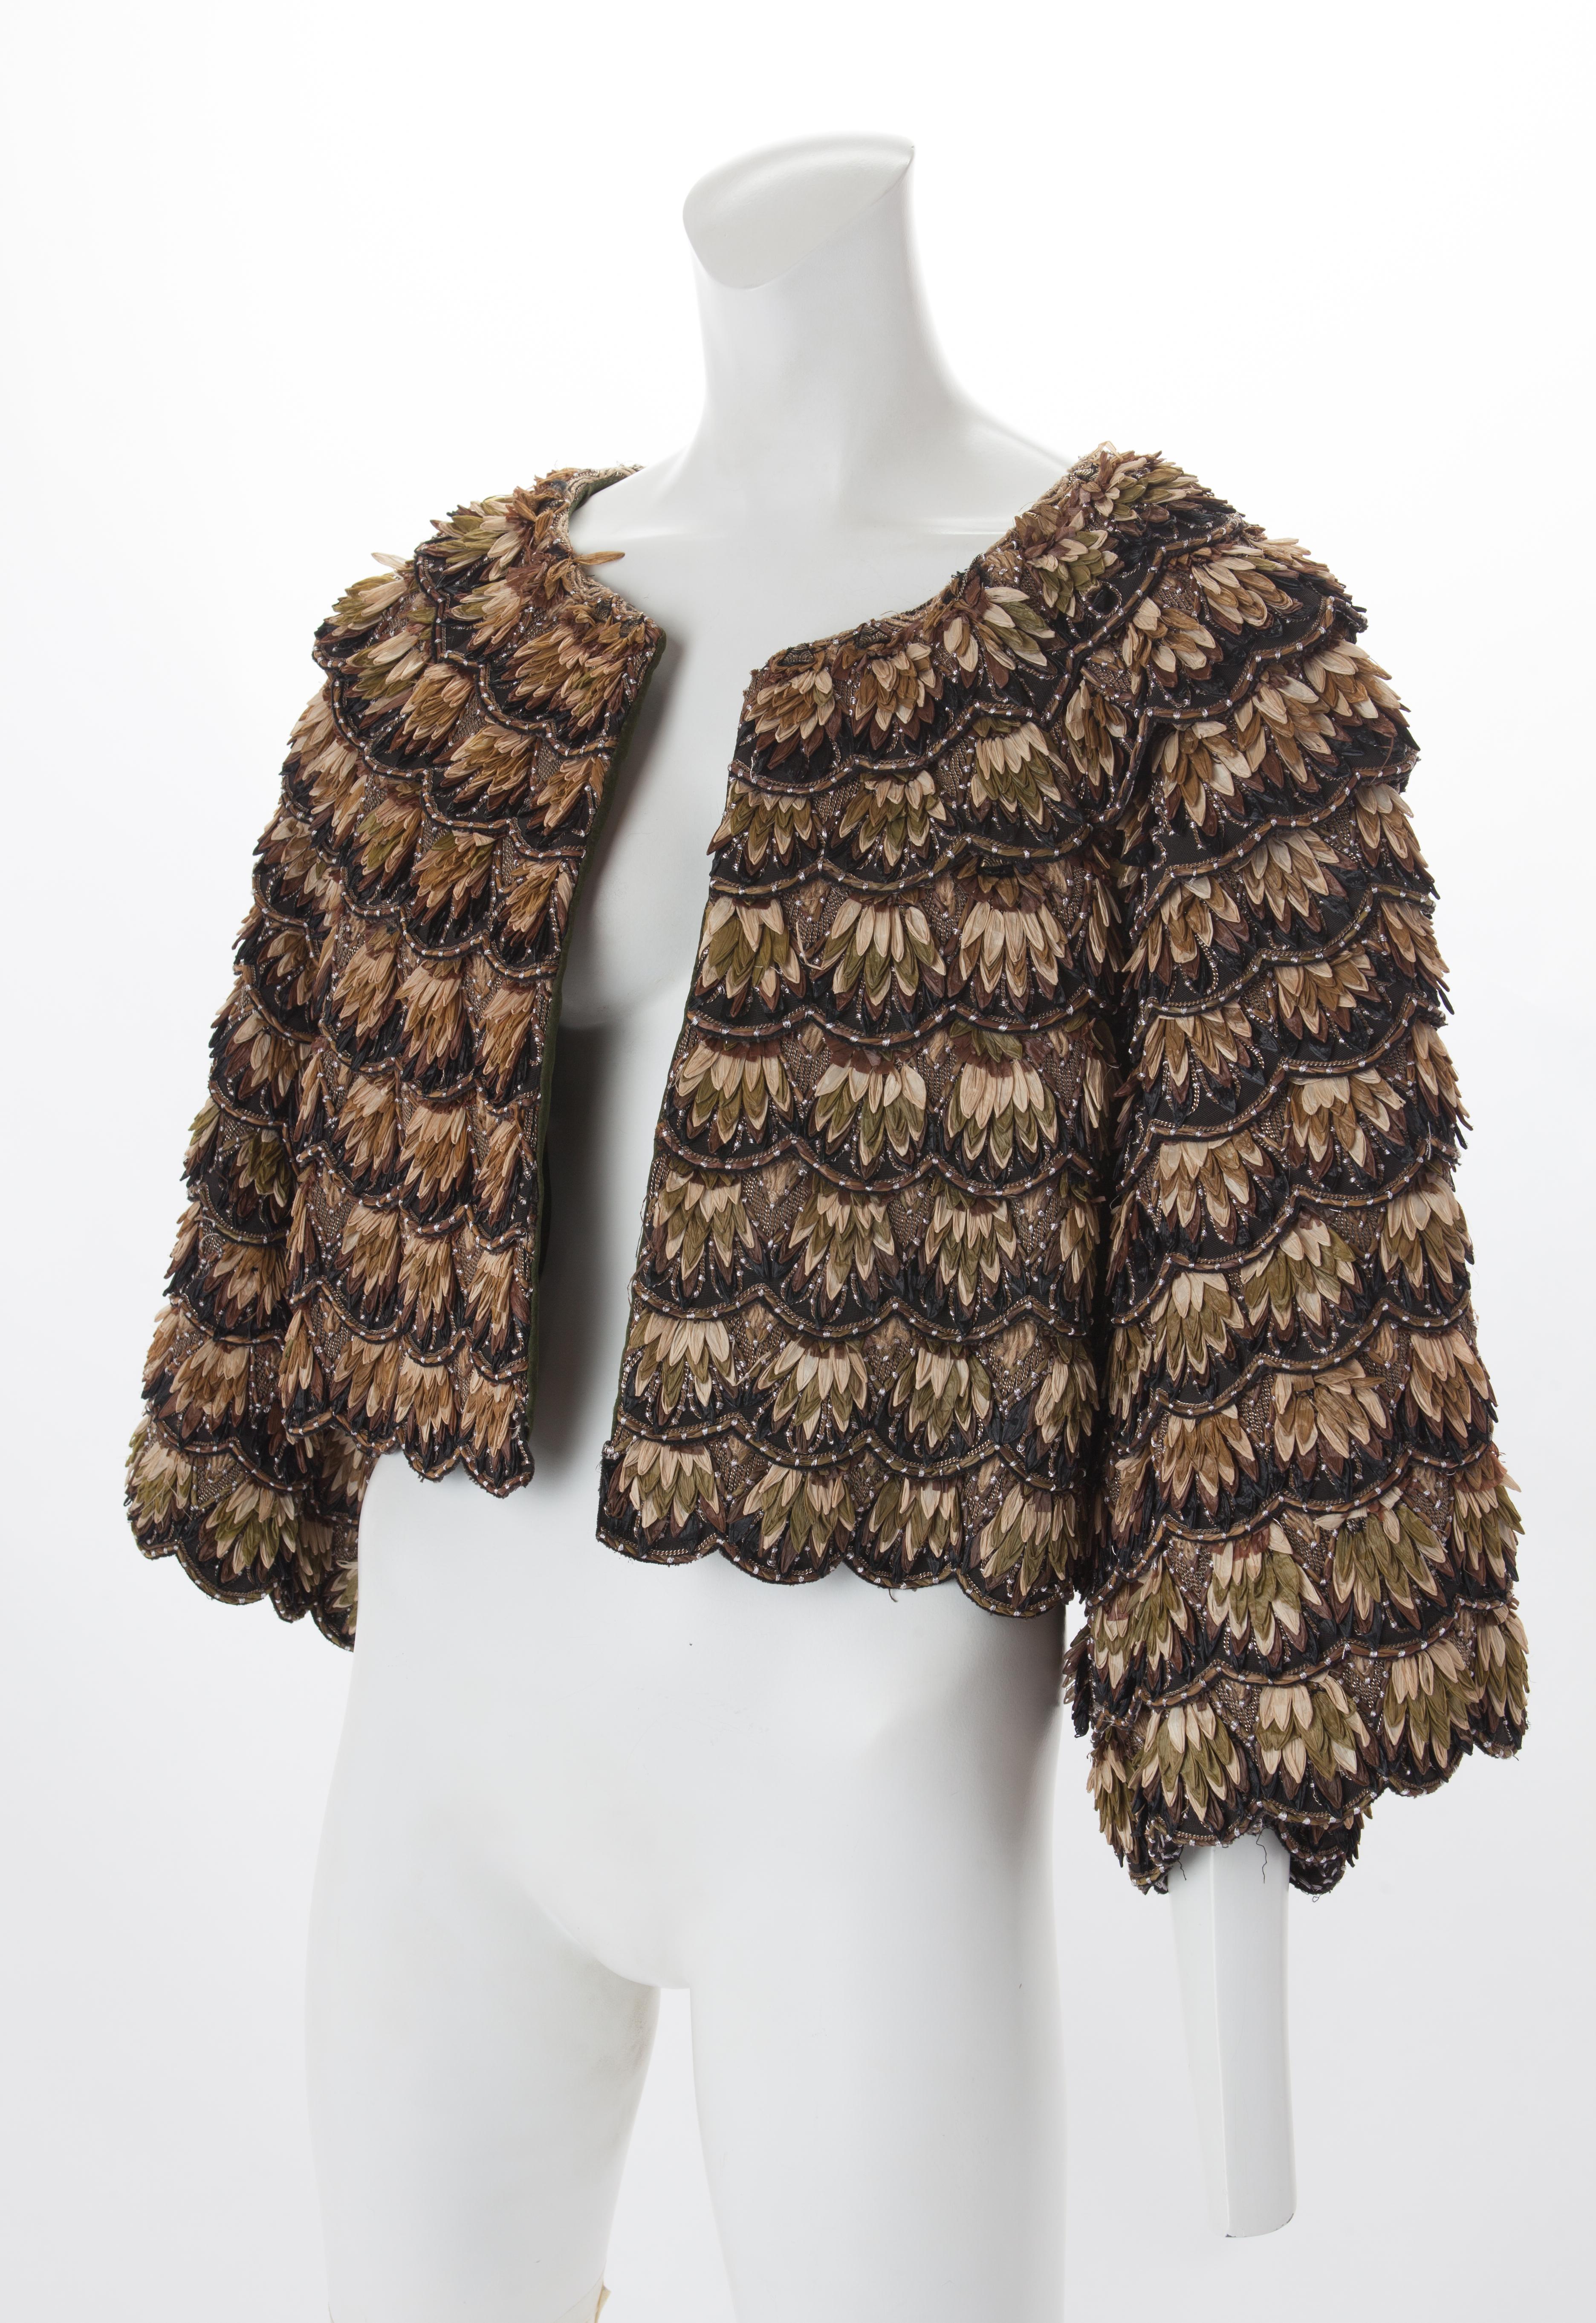 KENZO Couture Raffia Jacket, c.2000s.
Black, brown, and beige cropped jacket wide sleeves and all-over tiered horizontal panels. Embellished with layered raffia 